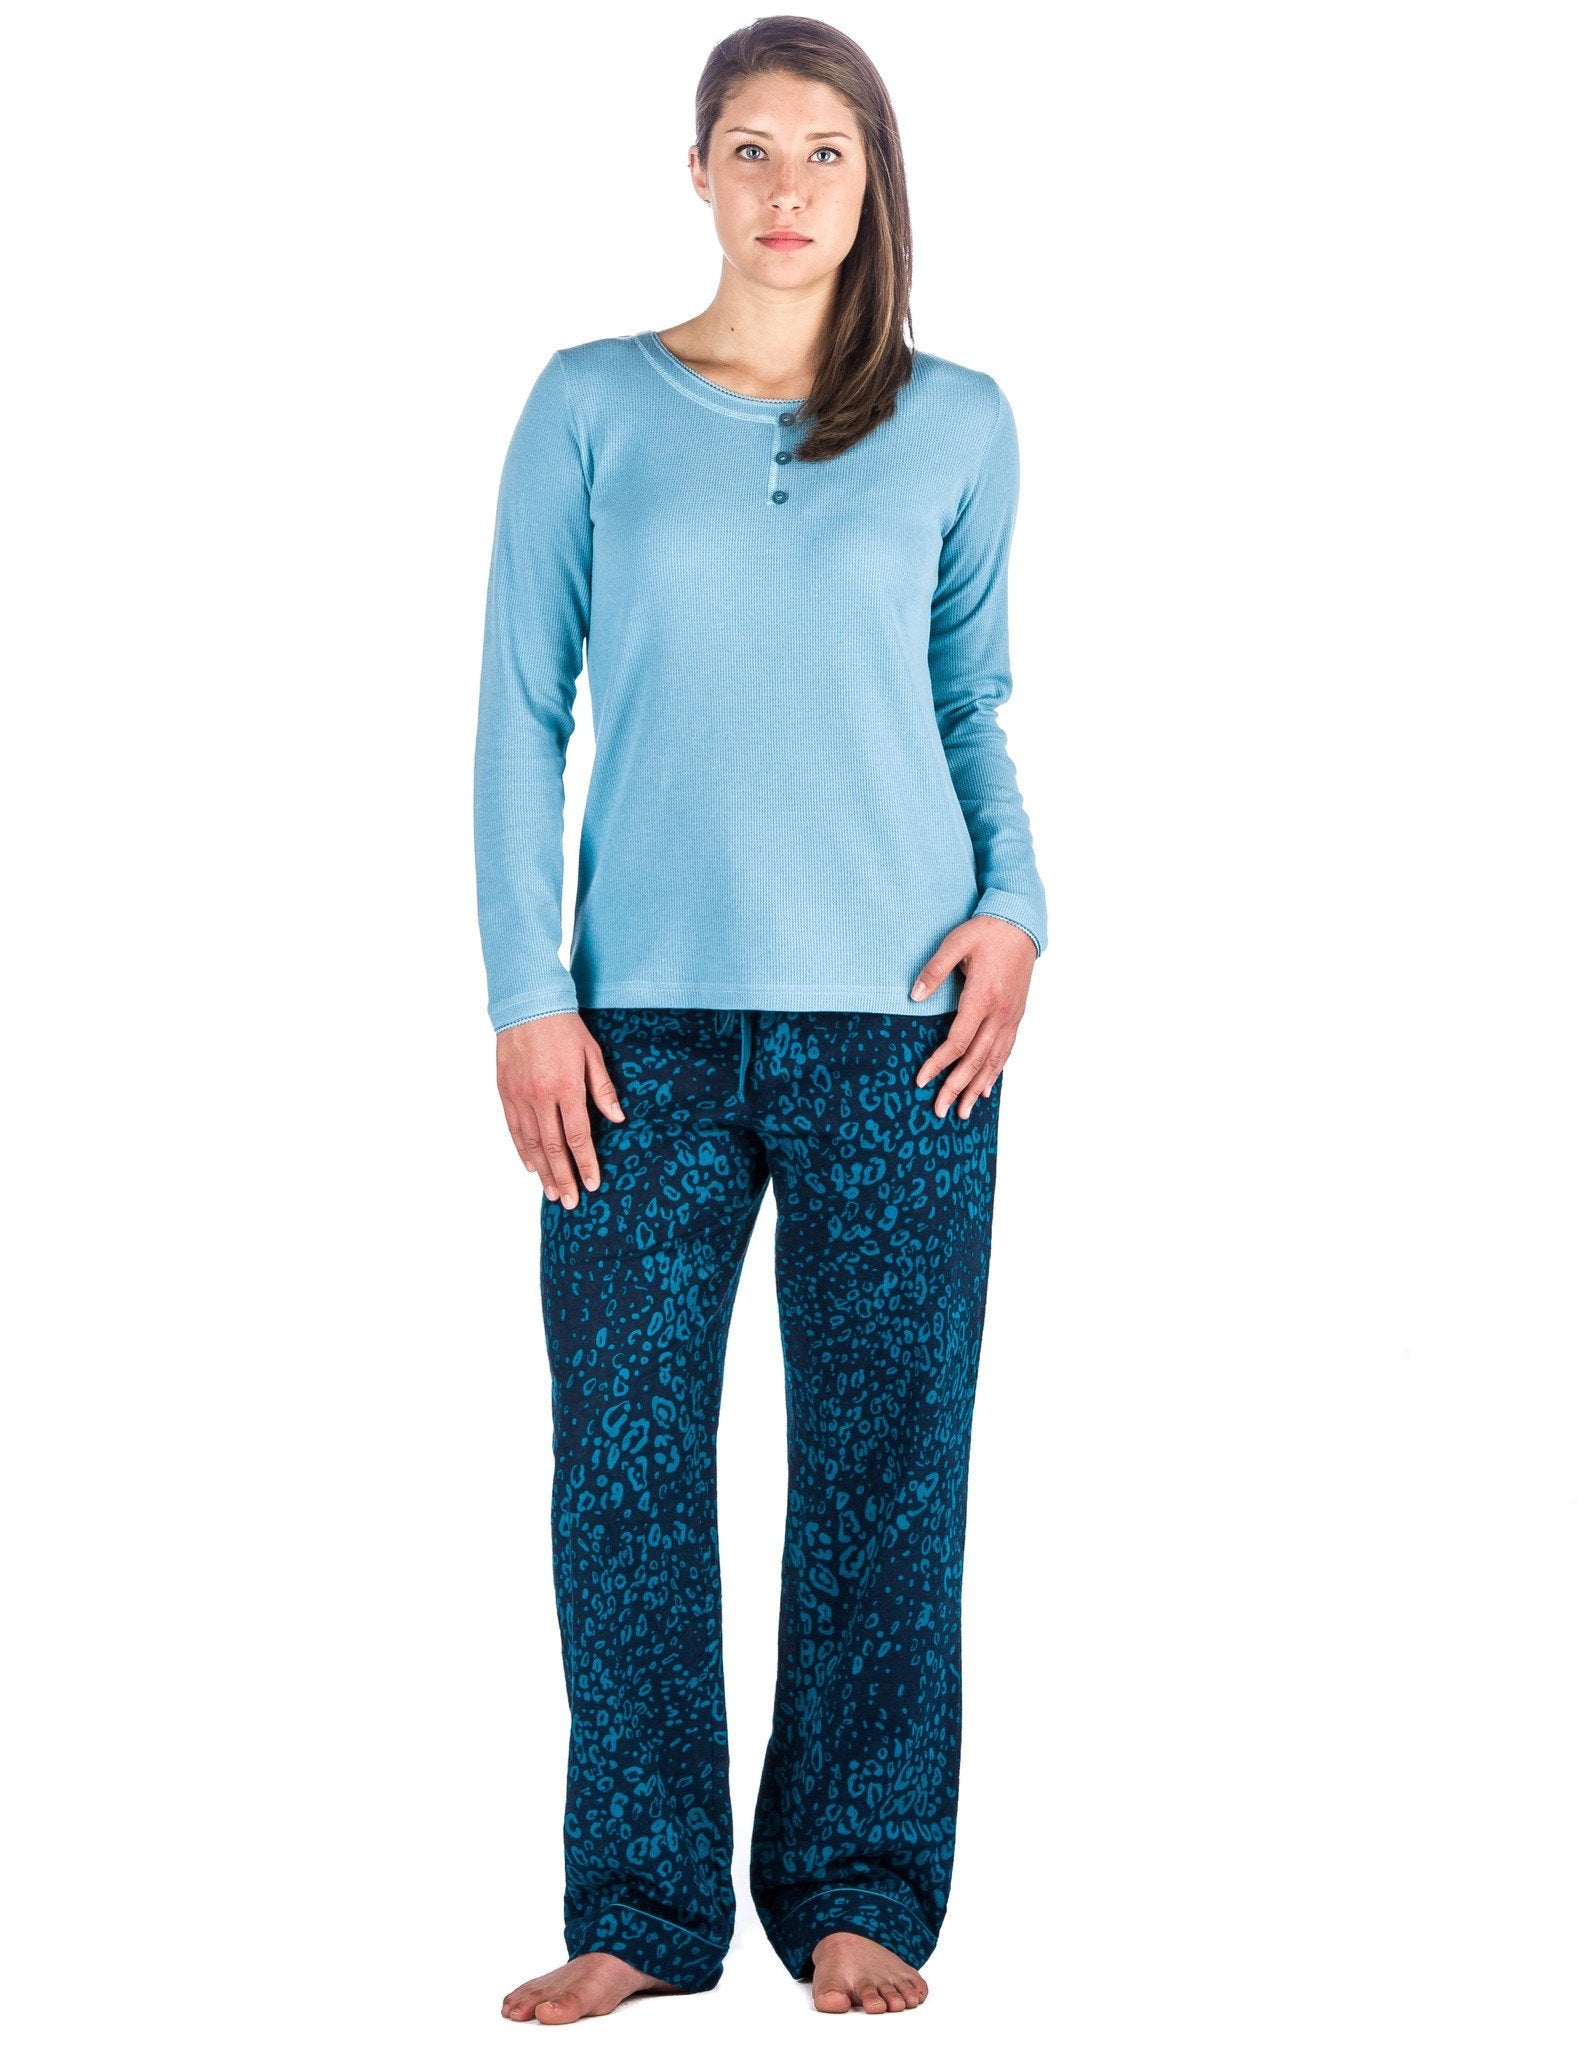 Relaxed Fit Womens Cotton Flannel Lounge Set with Crew Neck Top - Leopard Blue